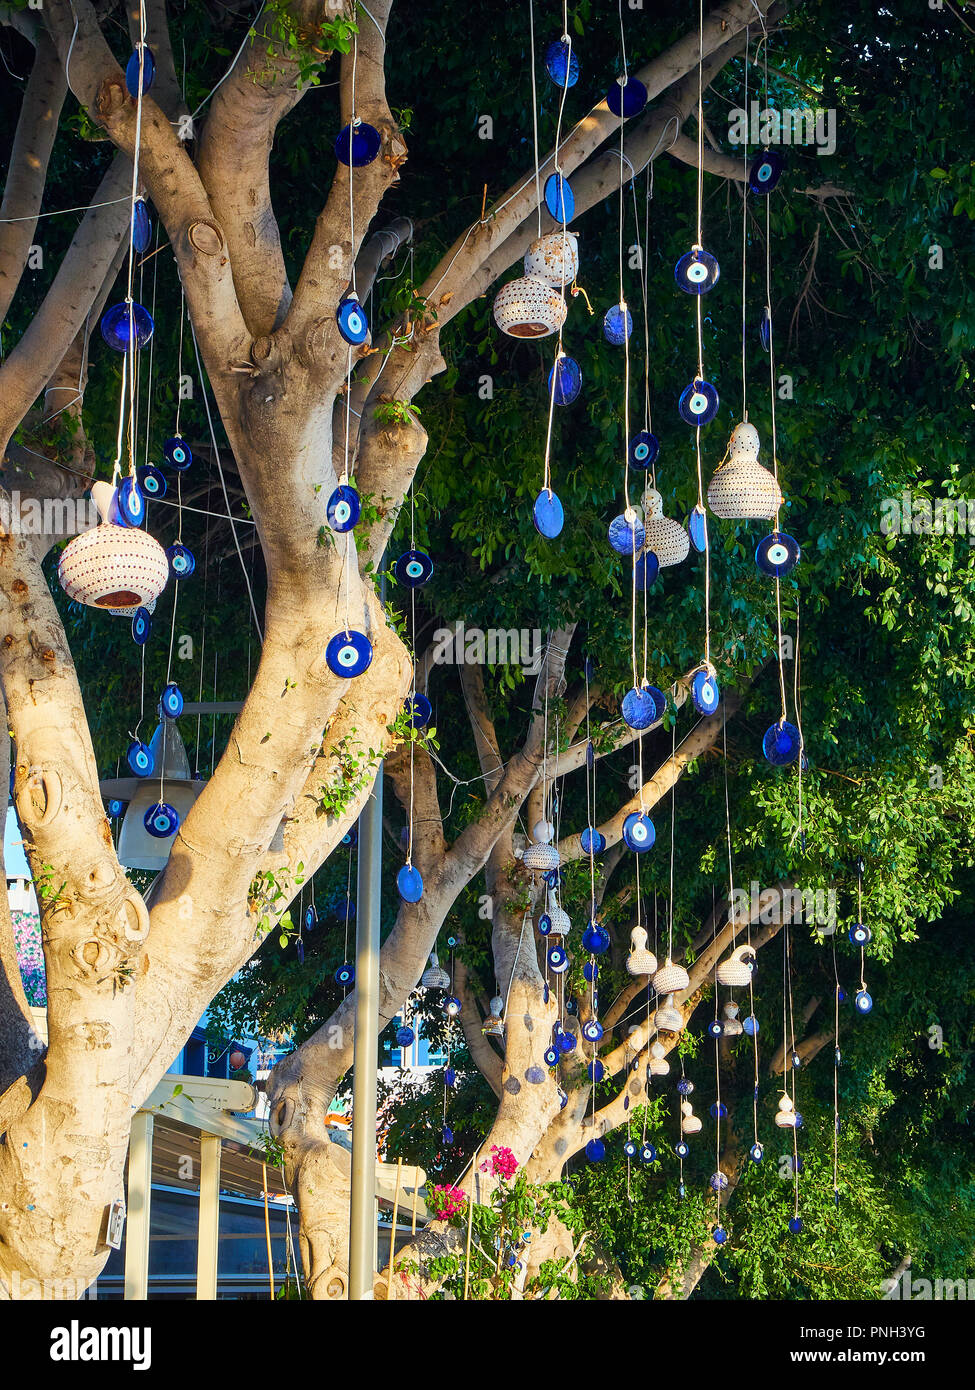 A lot of Nazar boncugu, a Turkish eye-shaped amulet hanging from the  branches of a tree. Turkey Stock Photo - Alamy